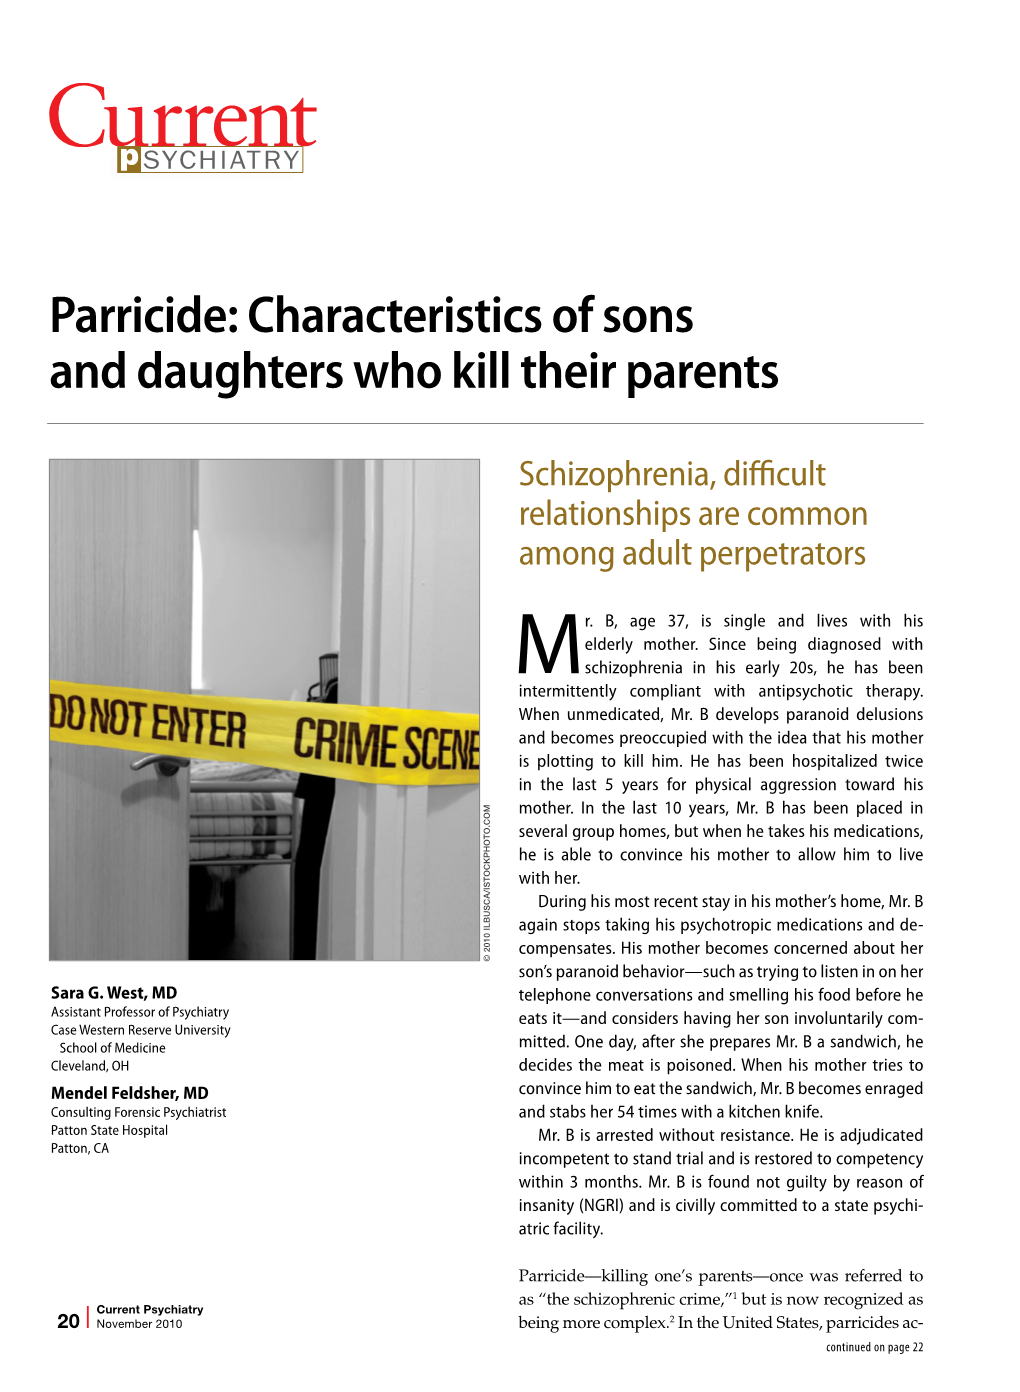 Parricide: Characteristics of Sons and Daughters Who Kill Their Parents